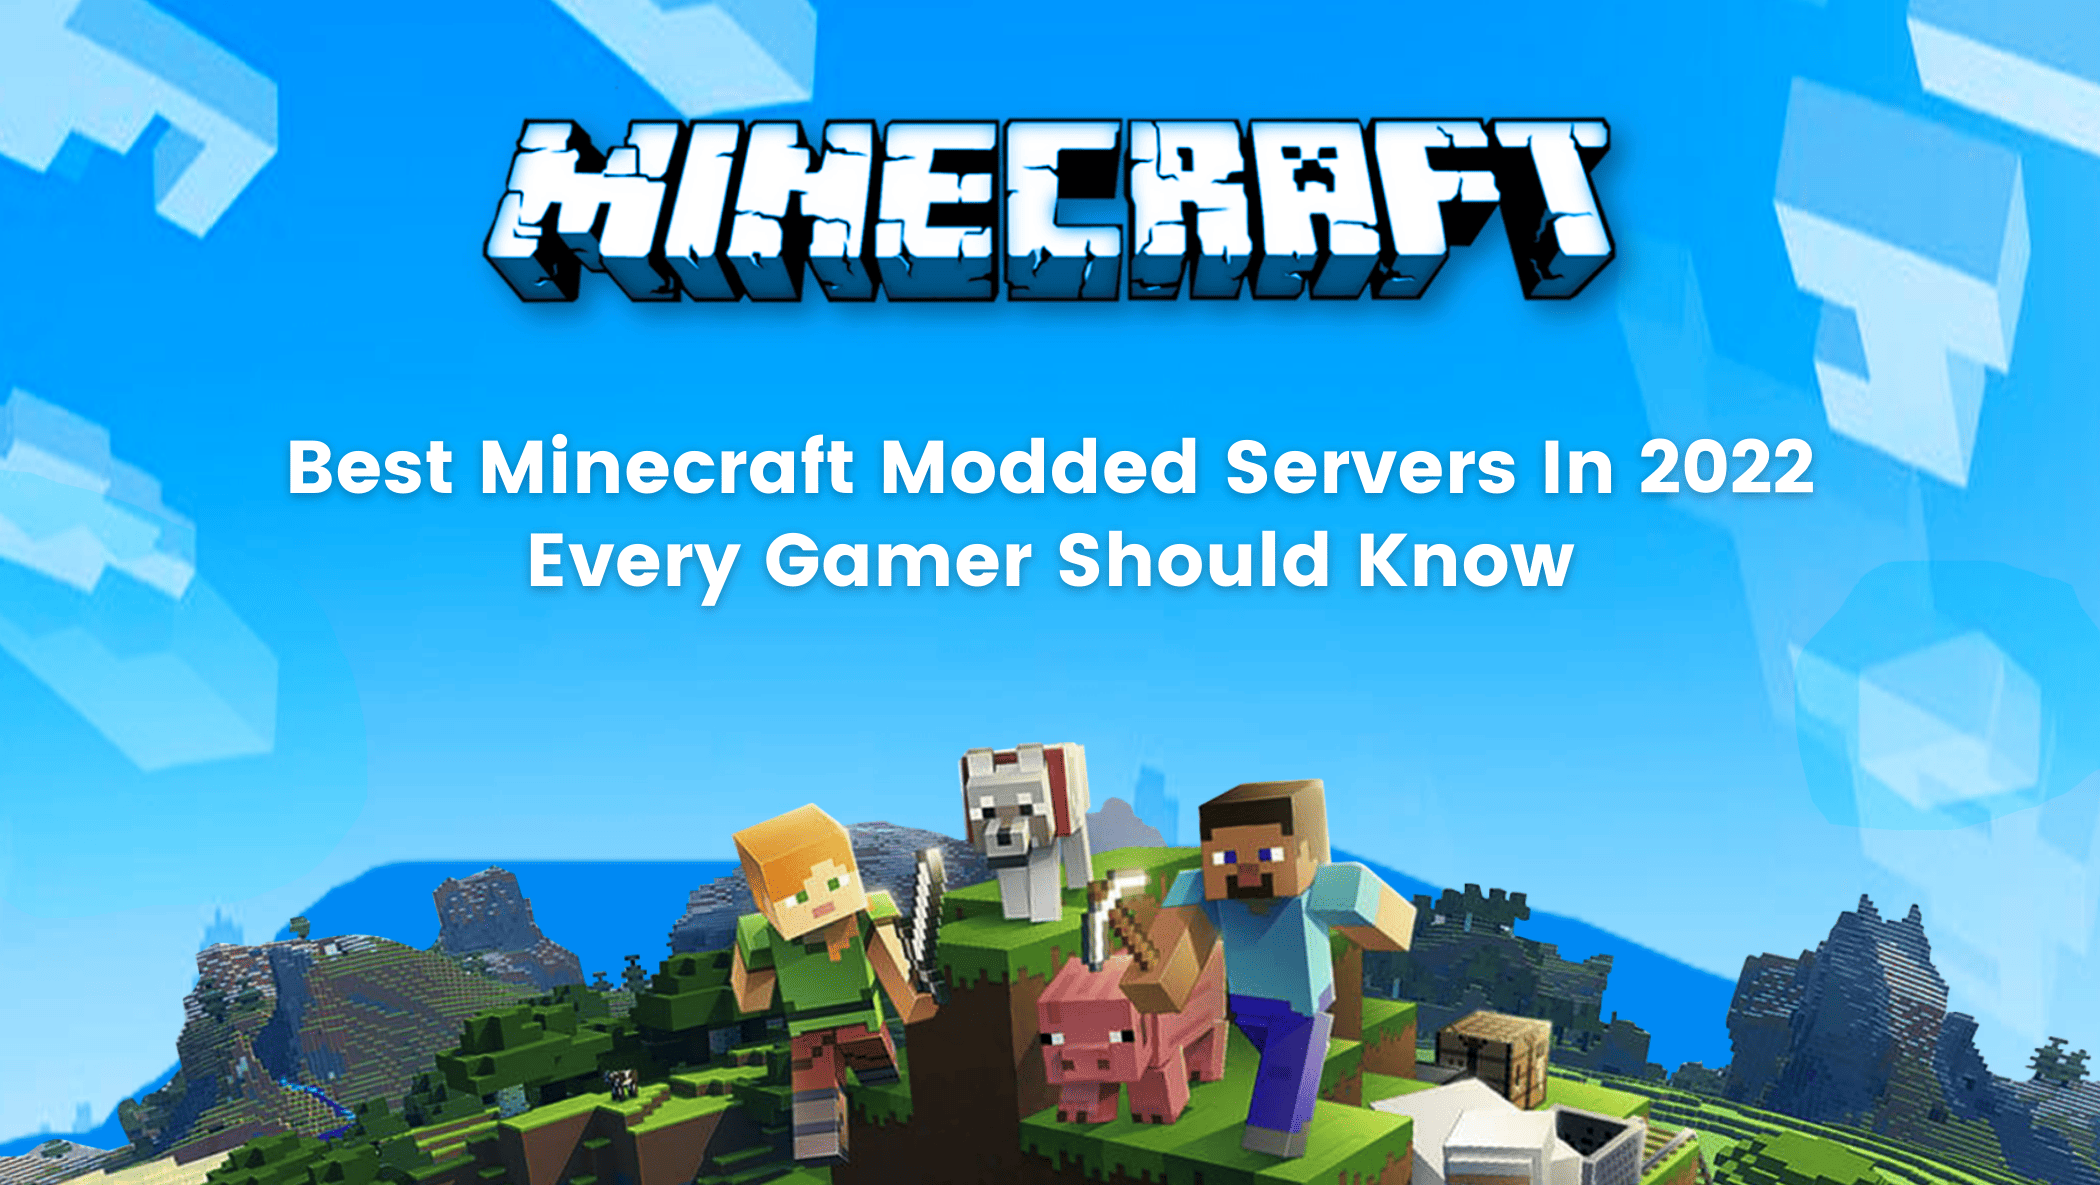 Best Minecraft Modded Servers In 2022 Every Gamer Should Know